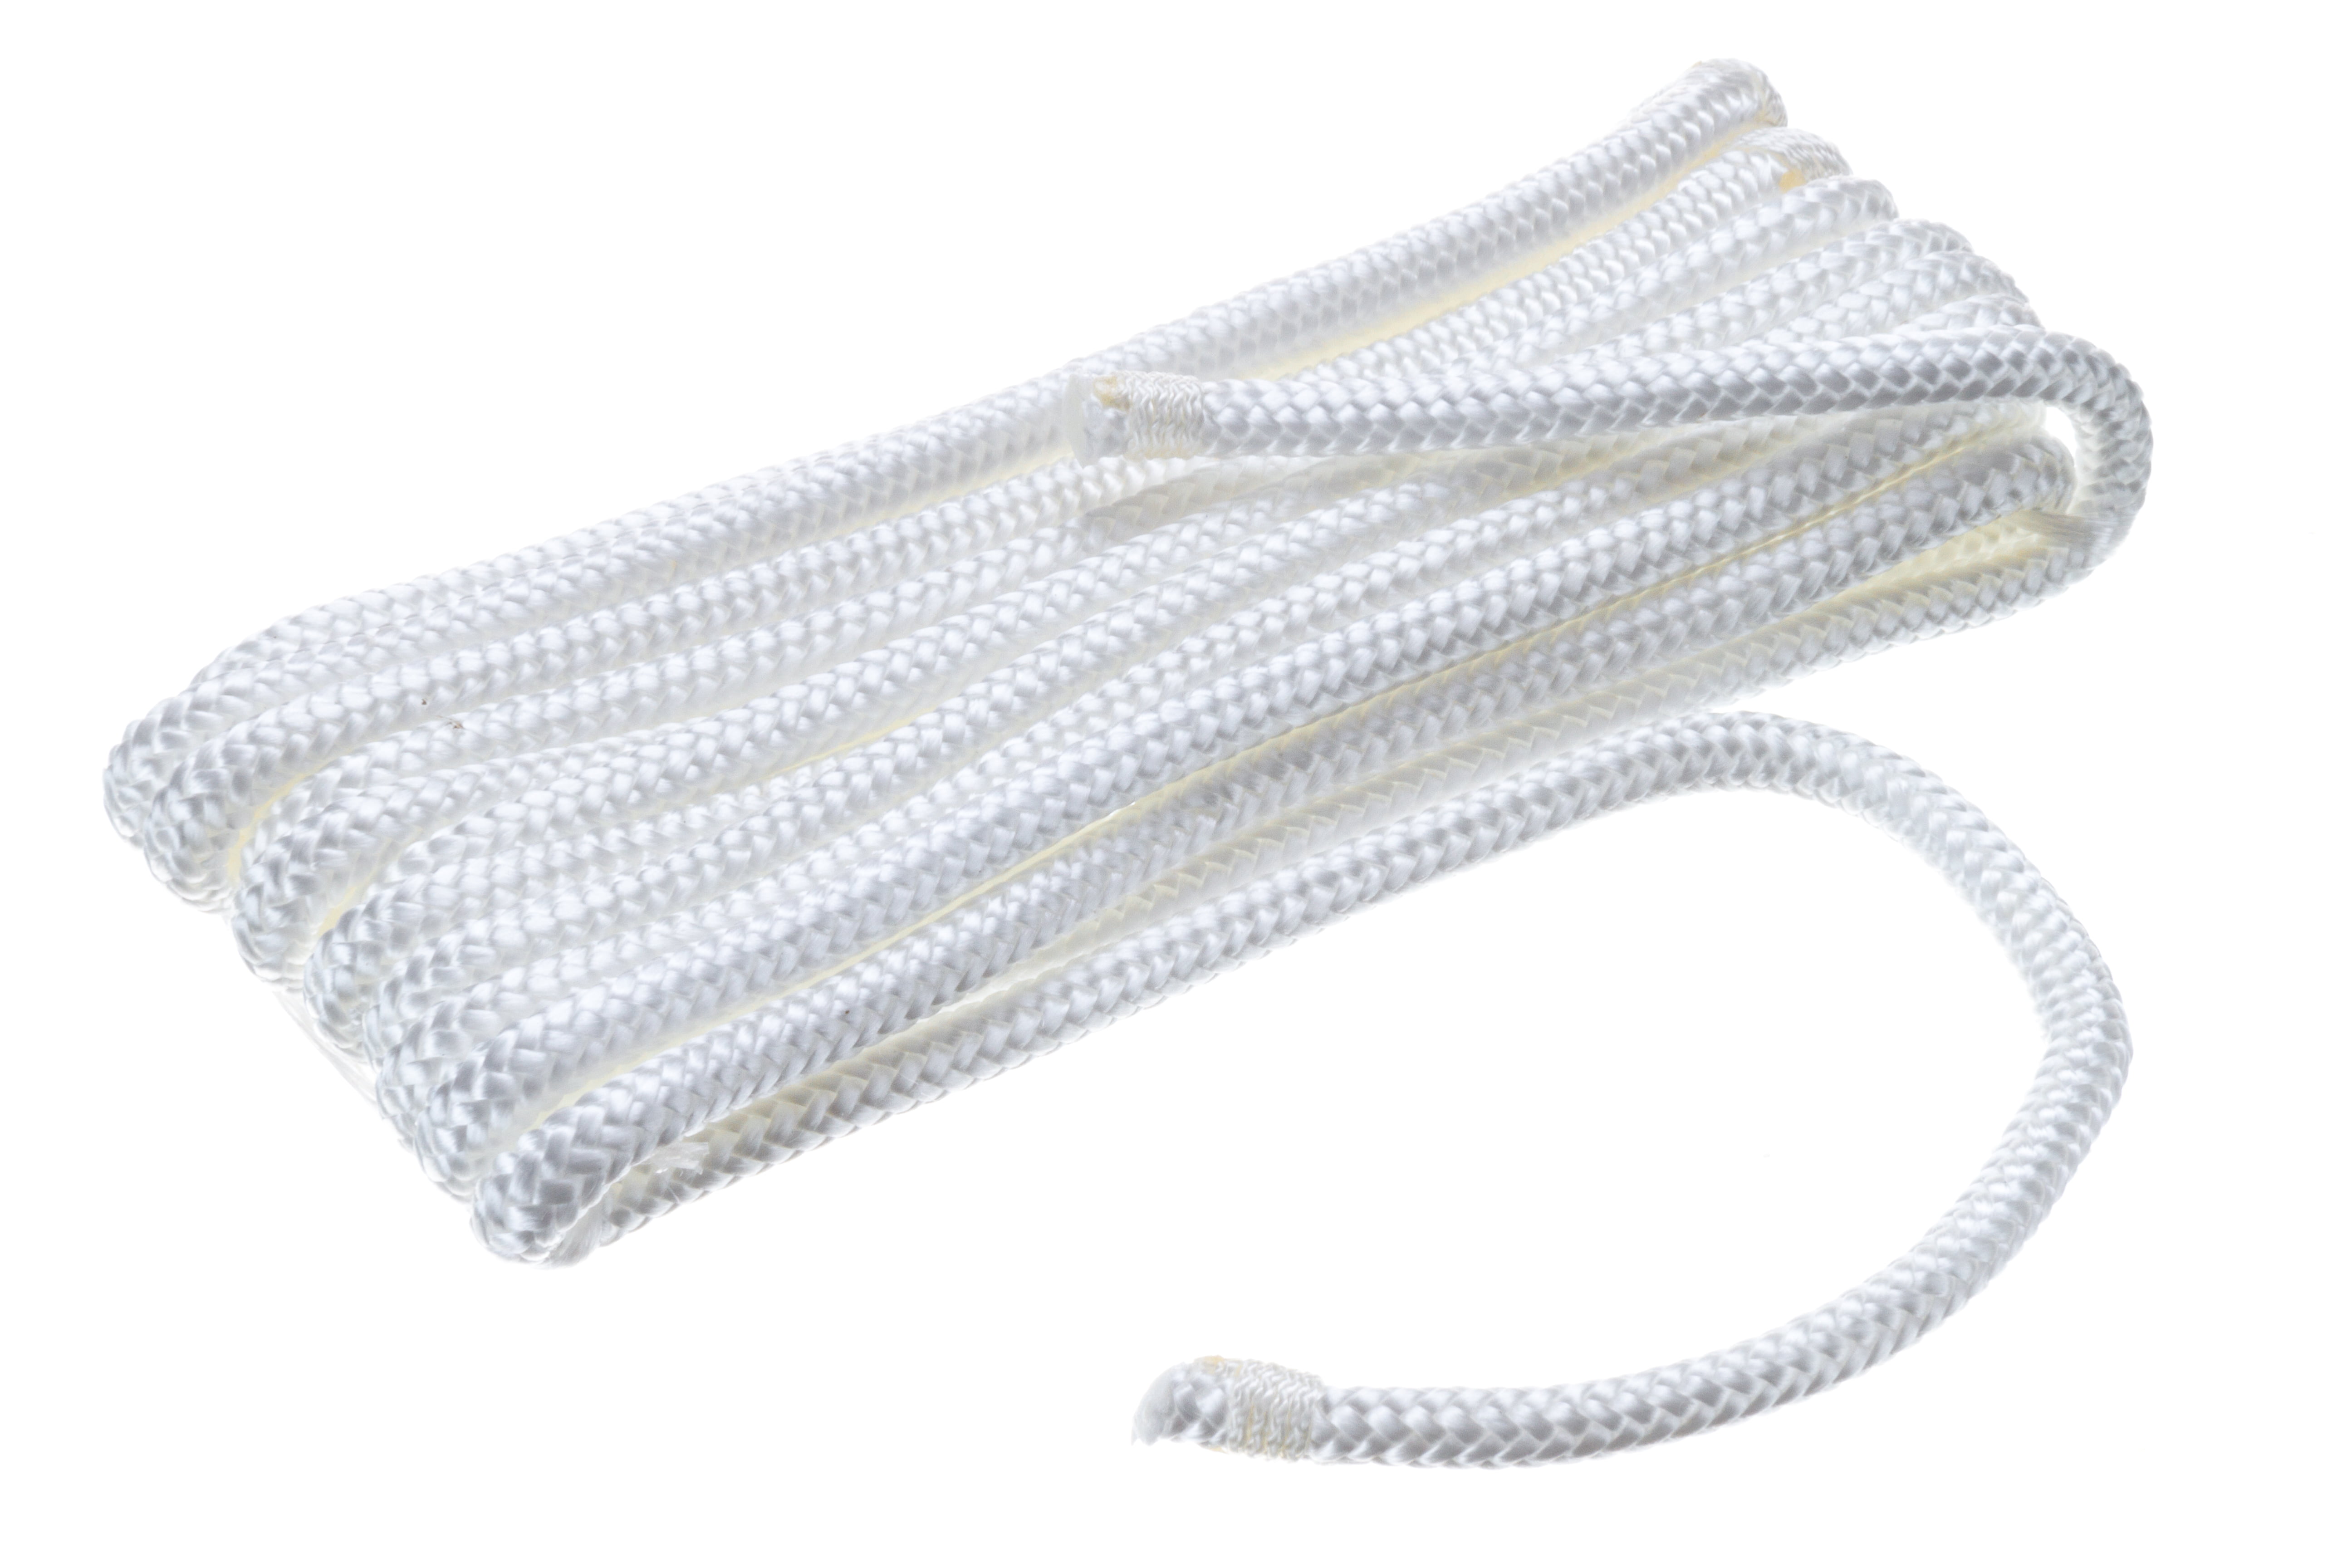 6 Pack of 1/4 Inch x 6 Ft Purple Double Braid Nylon Fender Lines for Boats 